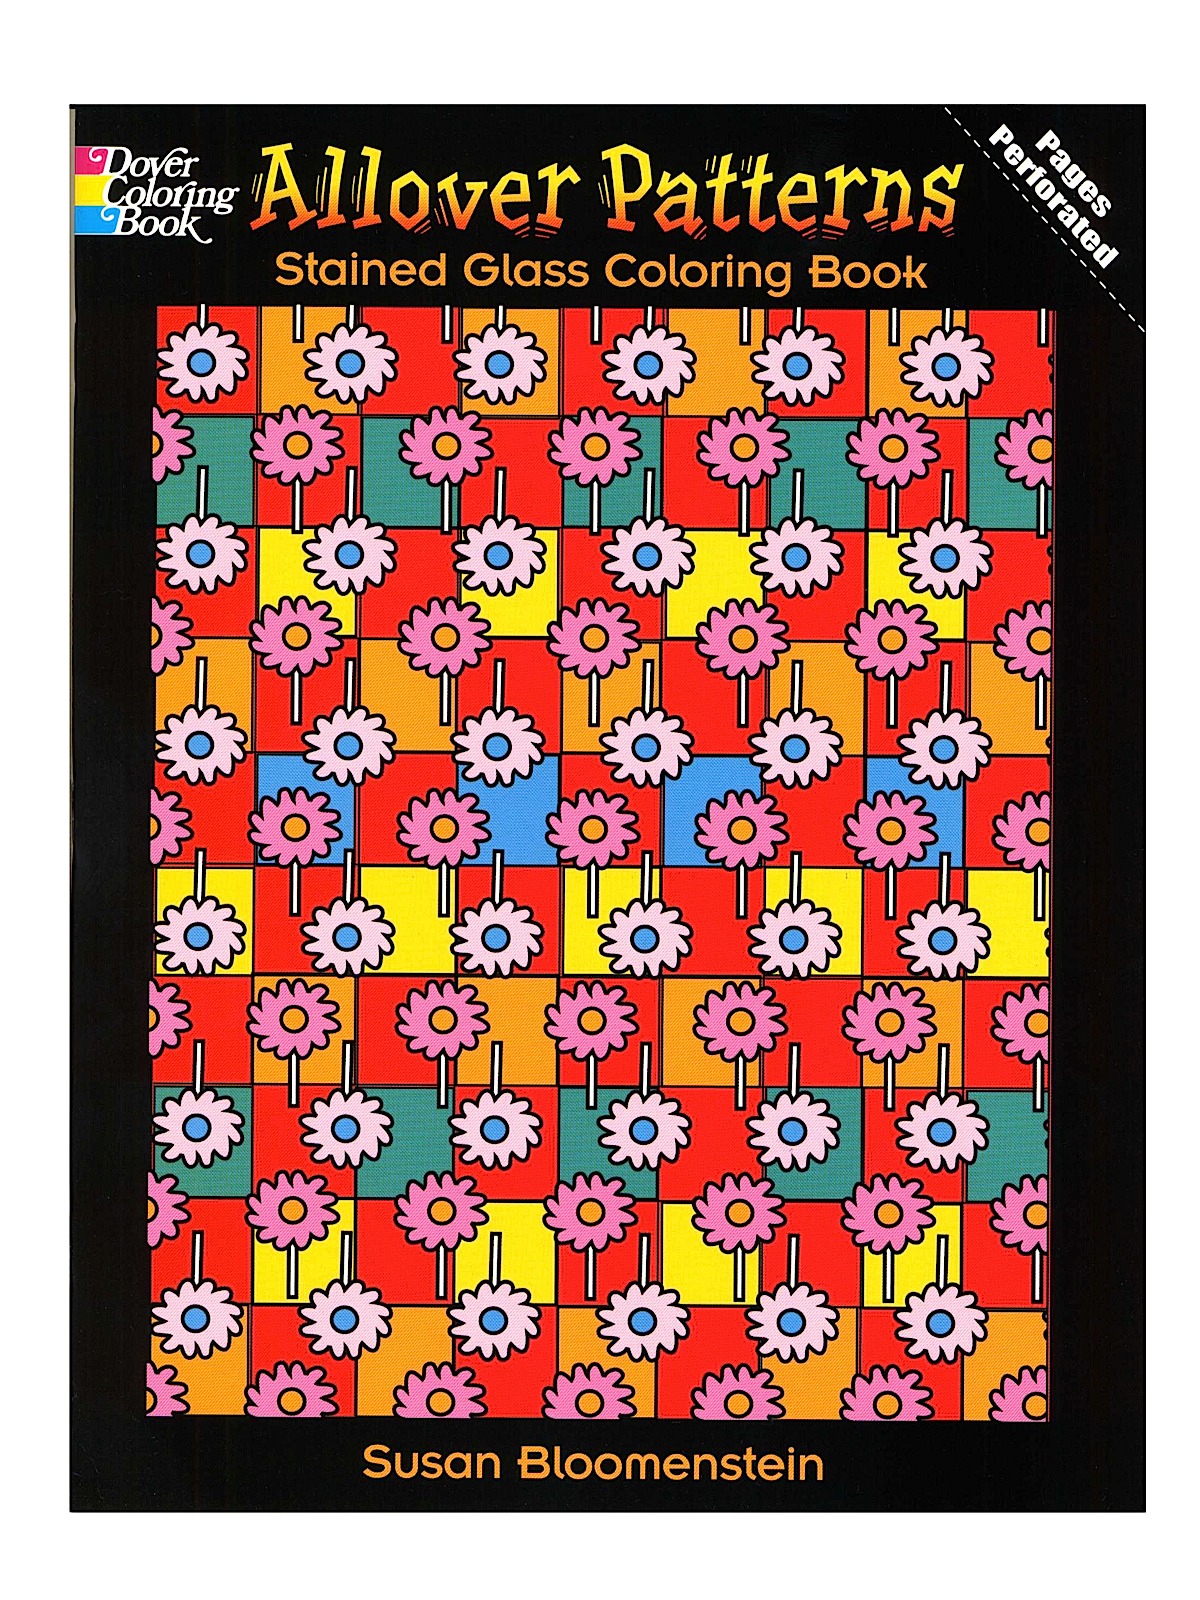 Stained Glass Coloring Books Allover Patterns